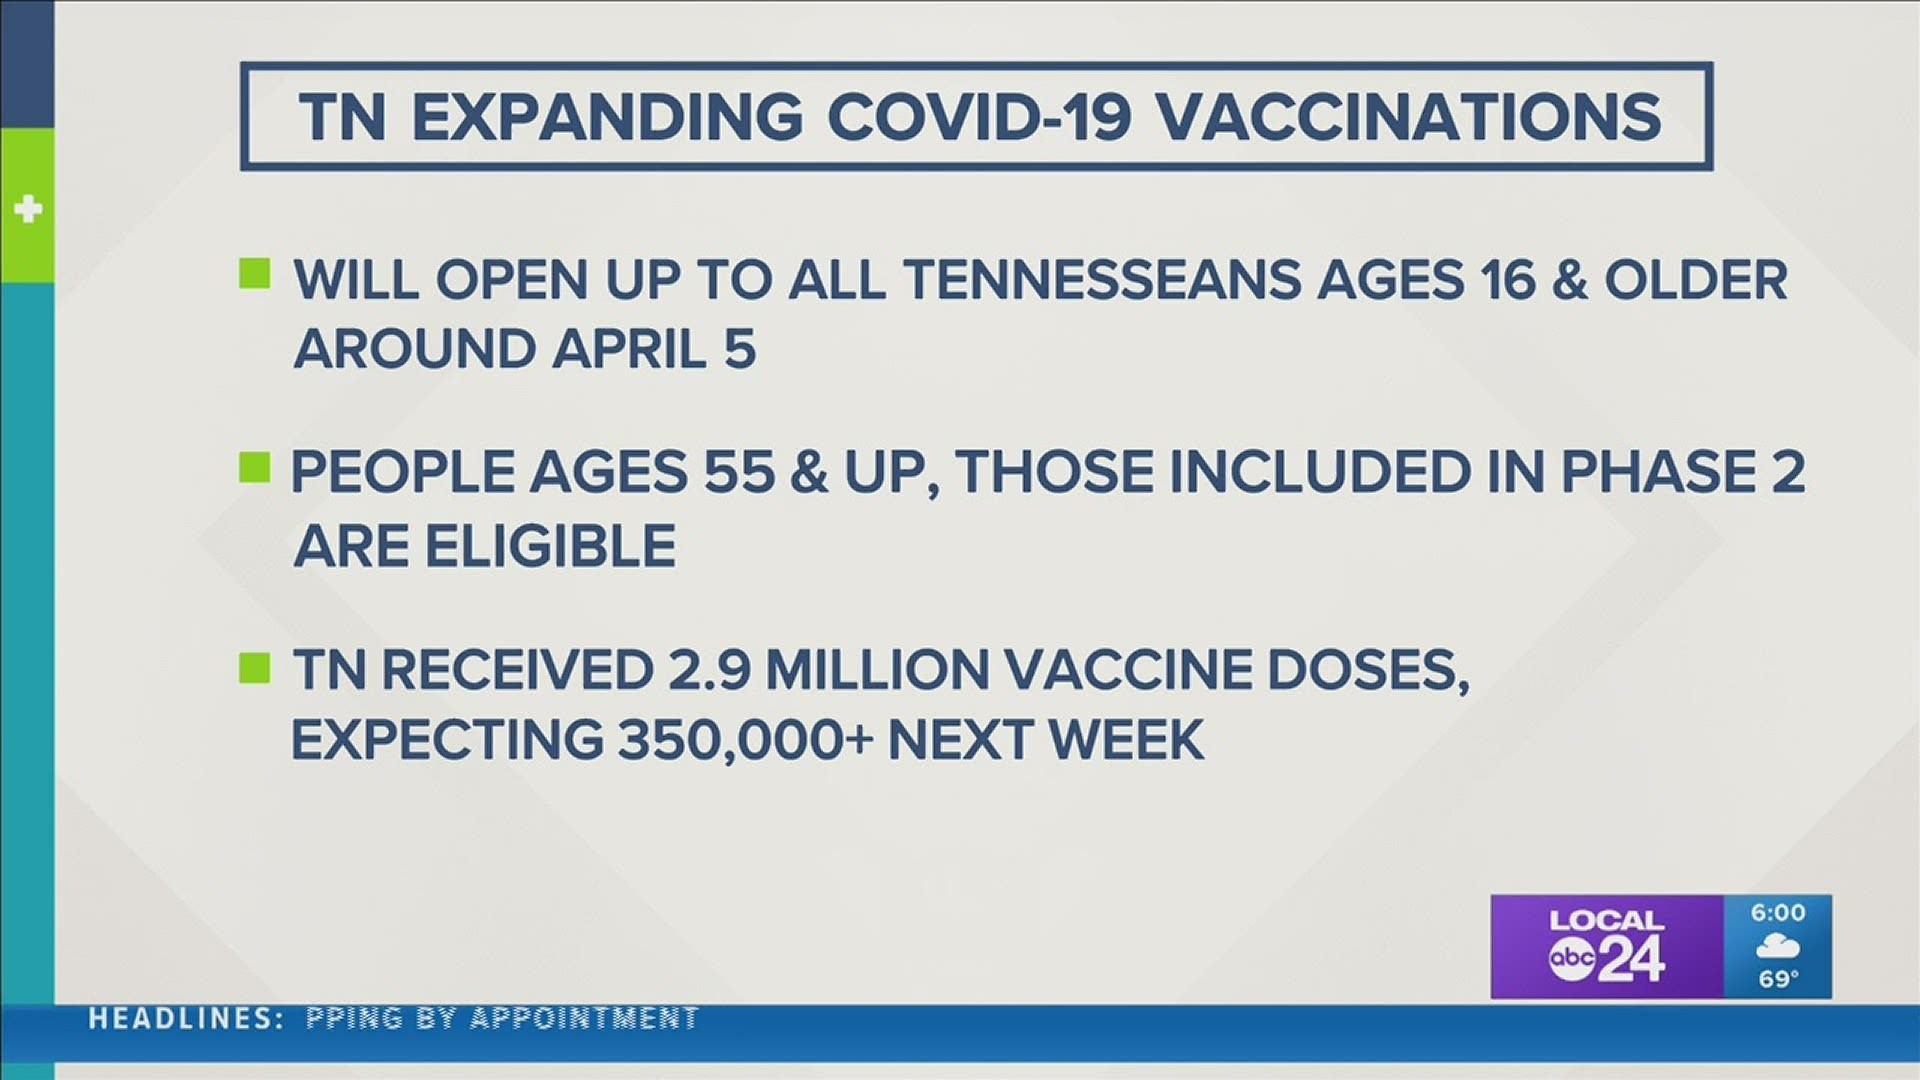 Last week, Memphis Mayor Jim Strickland asked the state to allow Shelby County to begin vaccinating all adults.